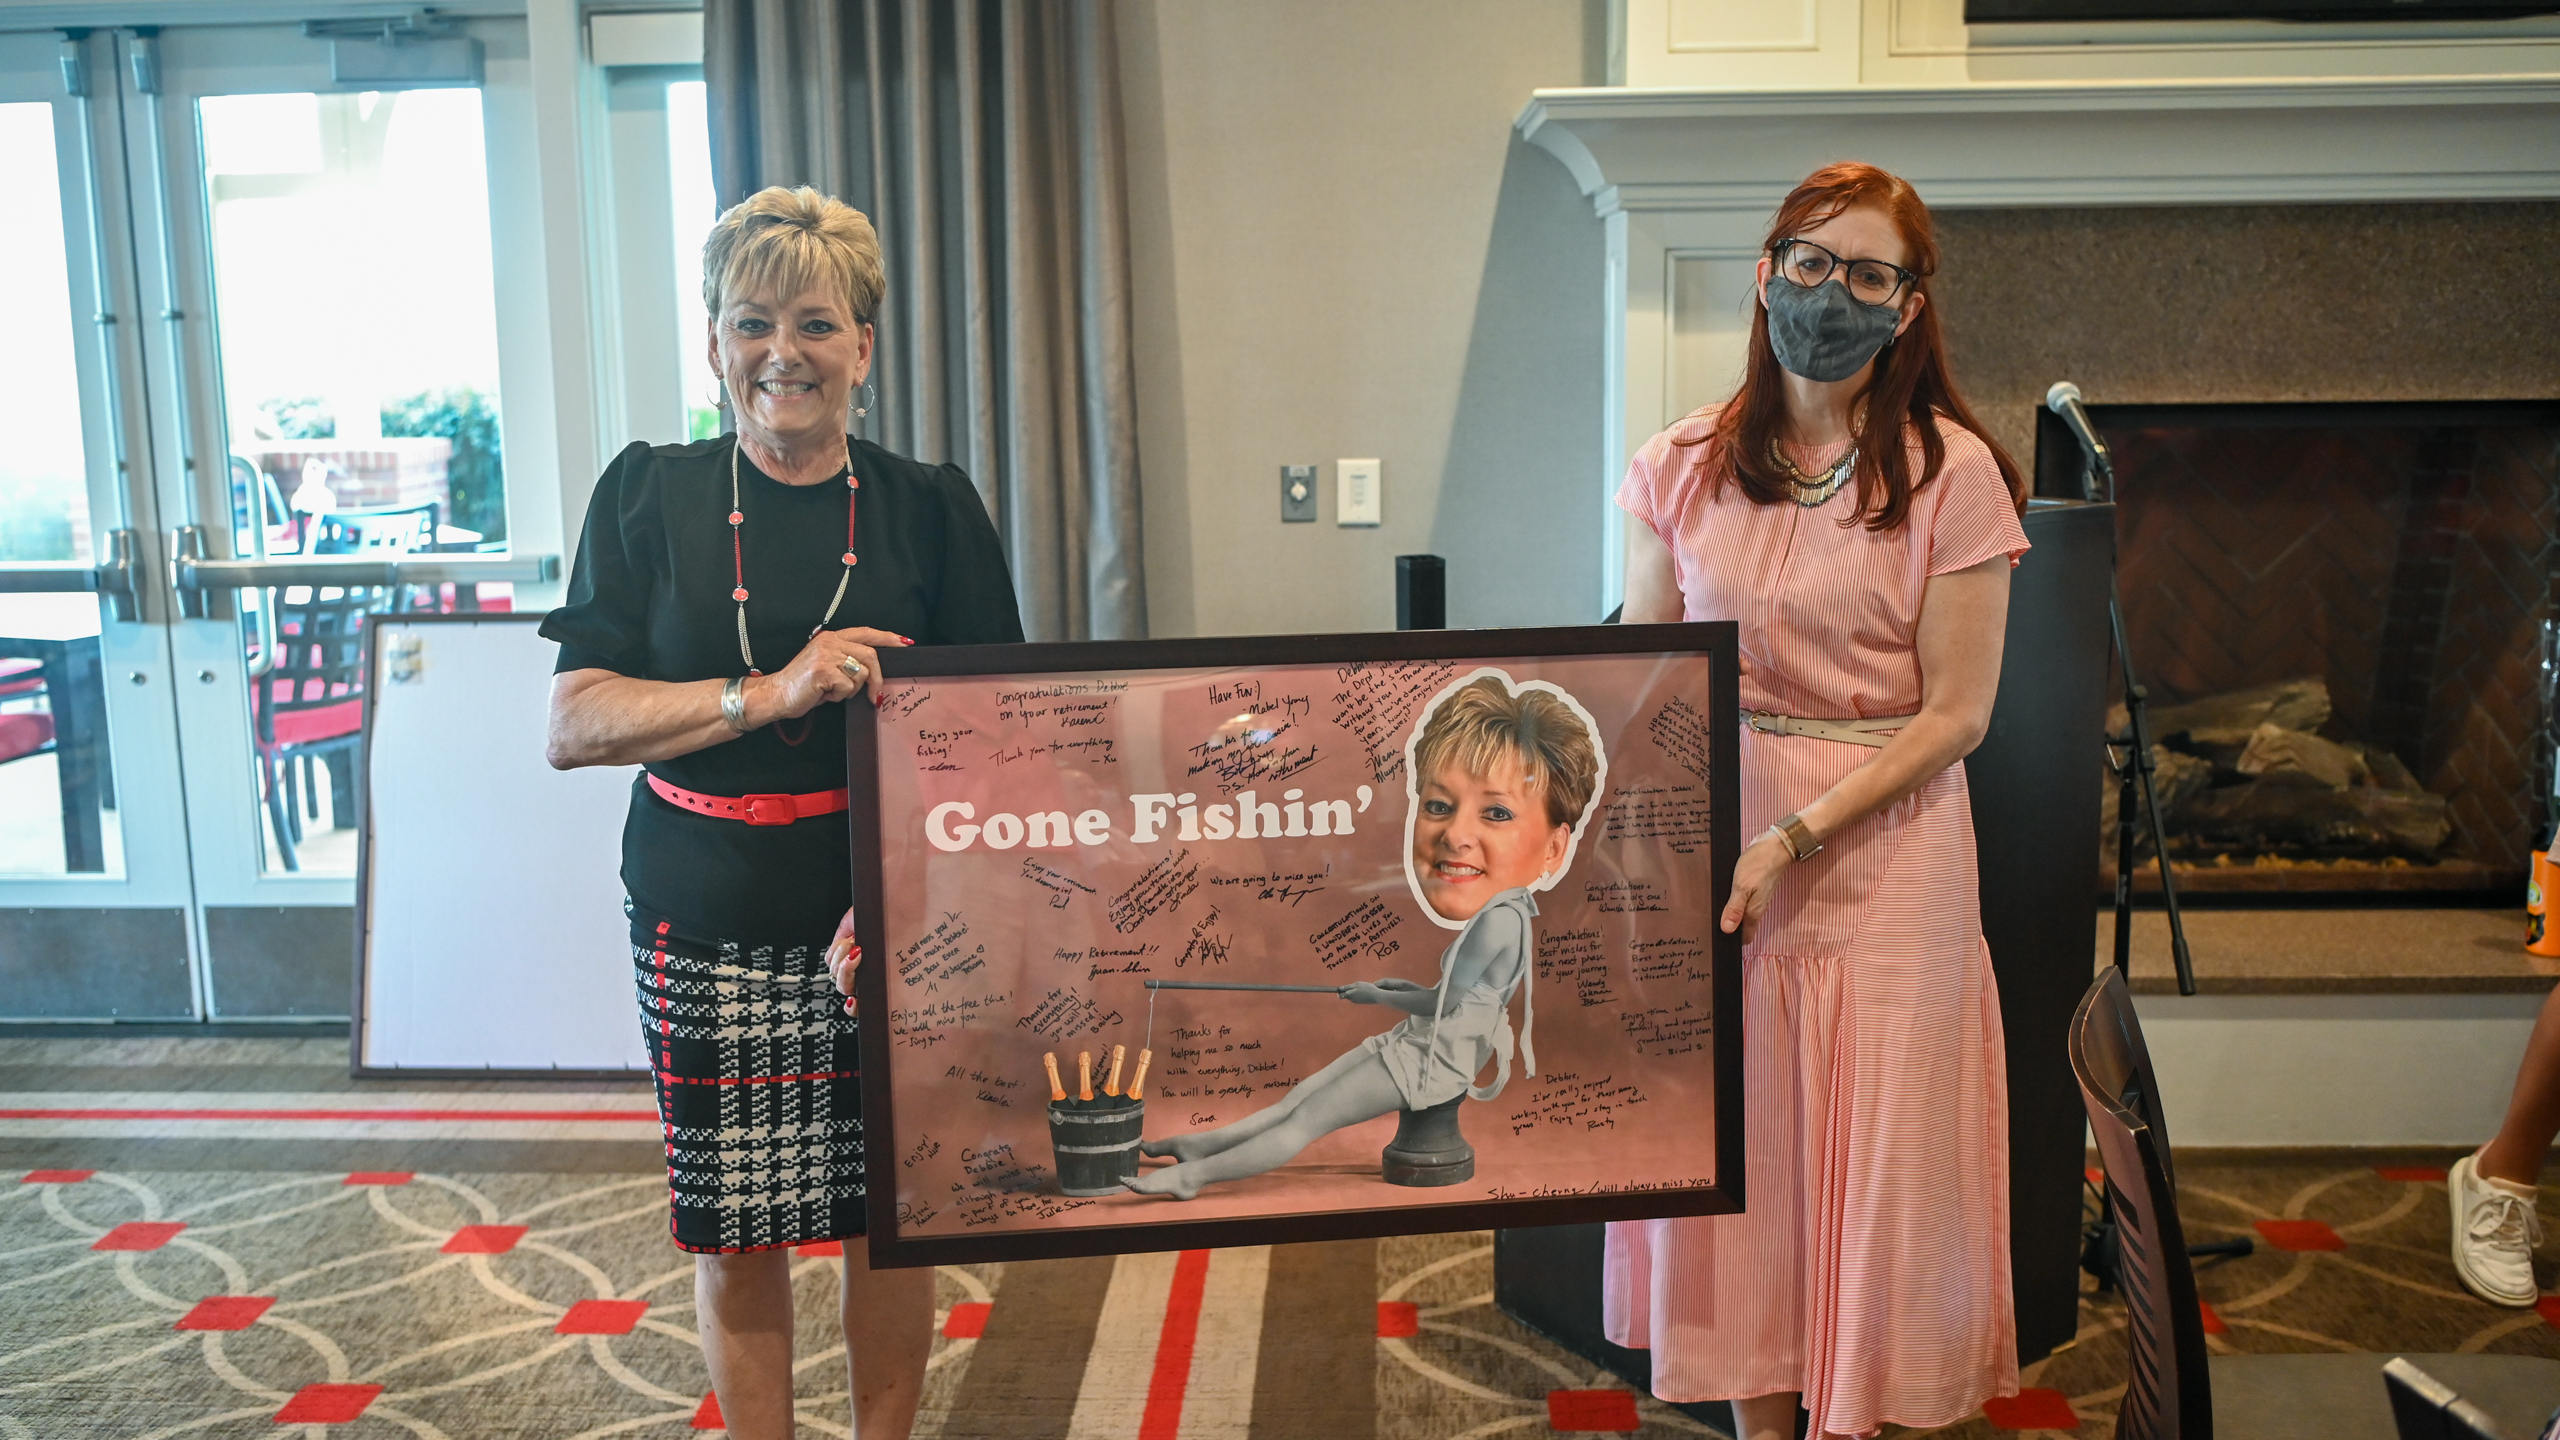 Julie Swann gives Debbie Allgood-Statton  a goodbye poster that says Gone Fishin. The poster is covered with signatures.